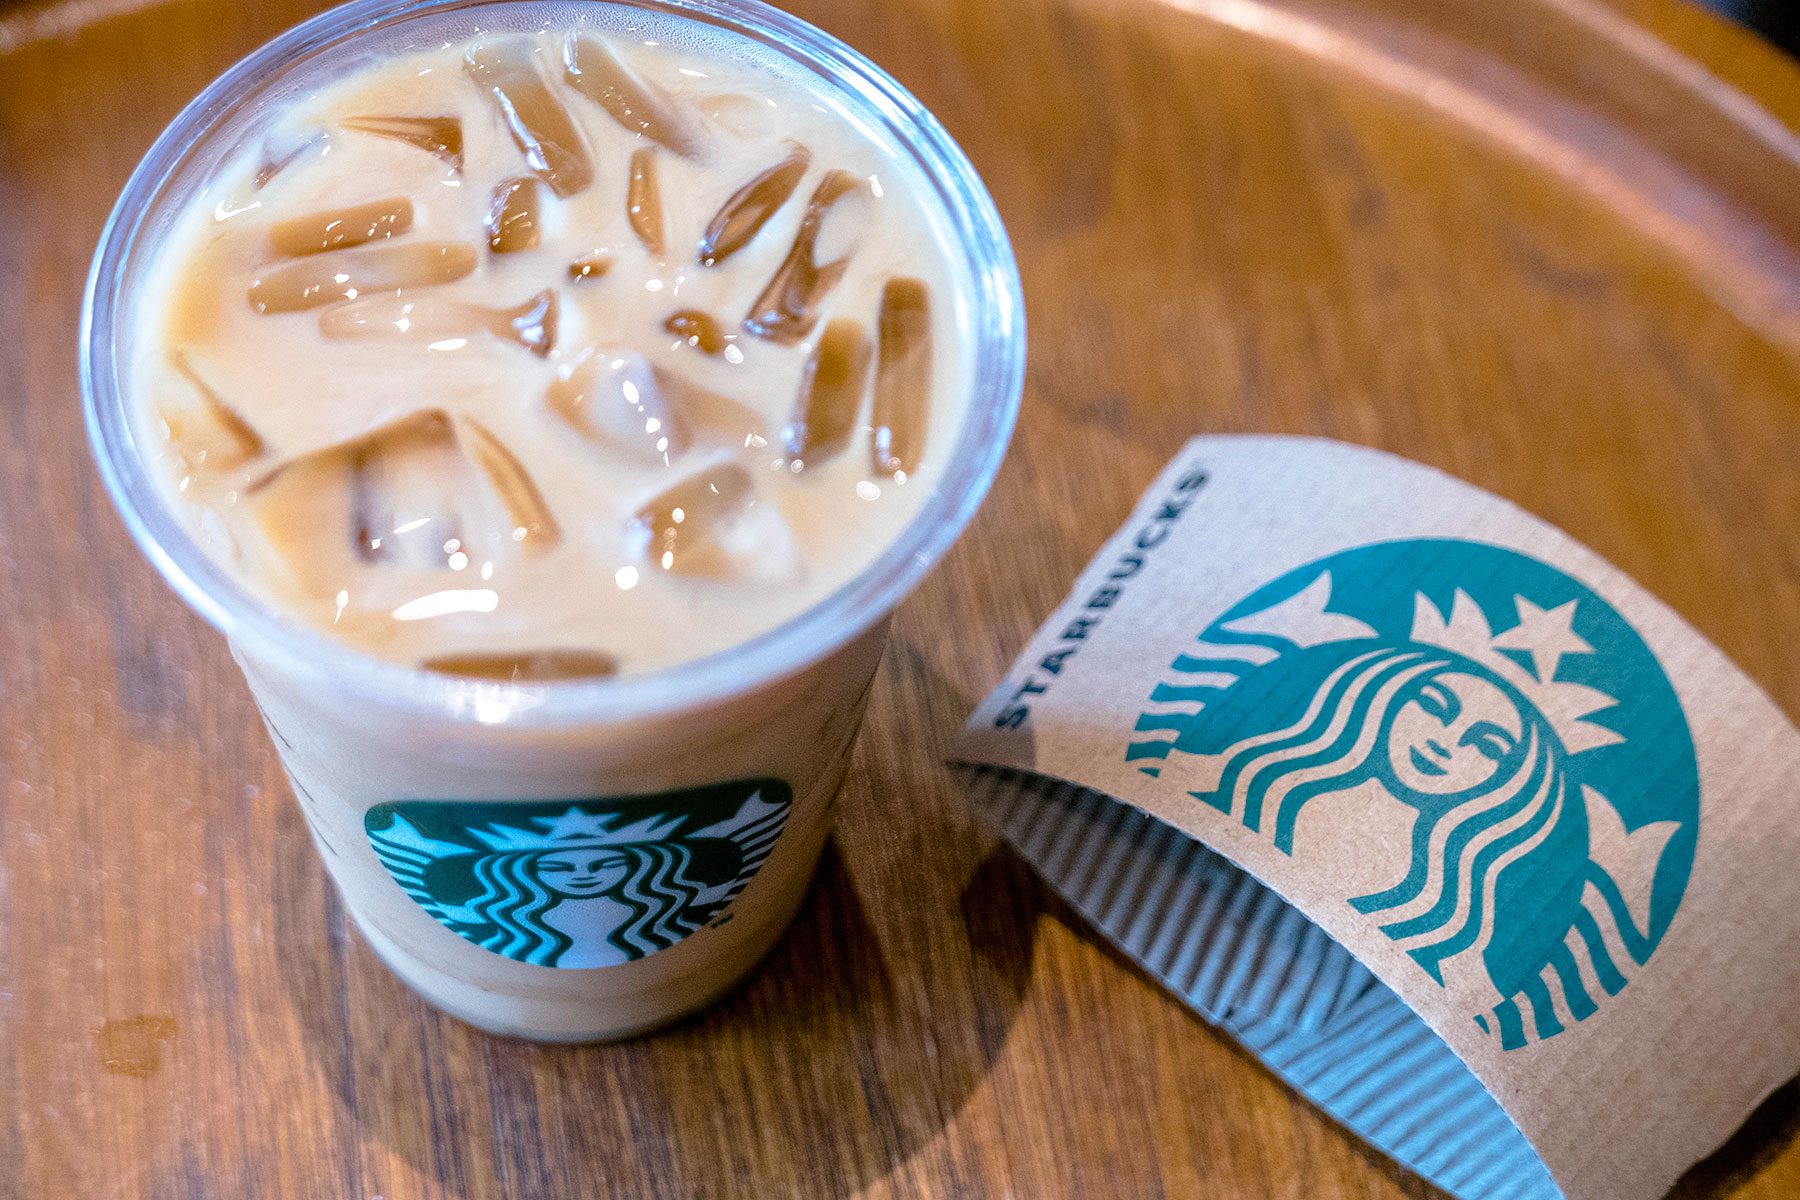 A Cup Of Icy Starbuck Coffee Logo On A Cup Of Starbuck